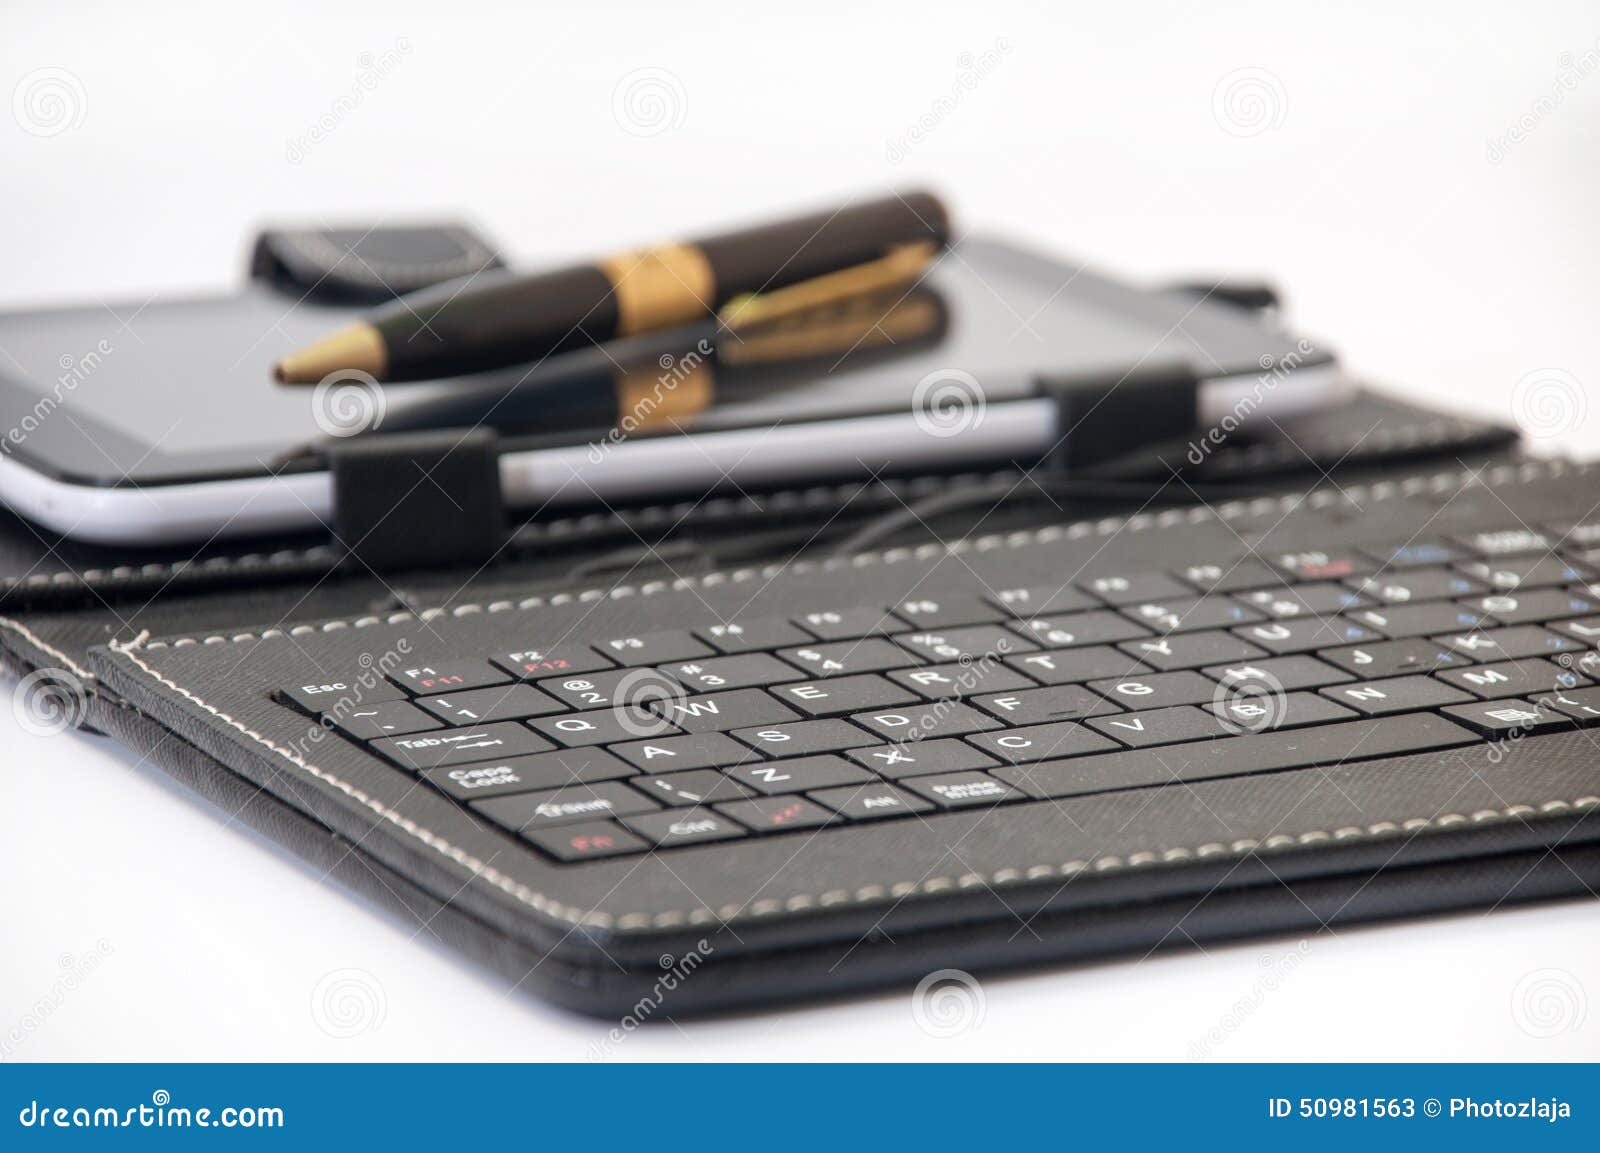 Keyboard for Android in Focus and the Tablet Background Stock Image - Image  of finance, device: 50981563